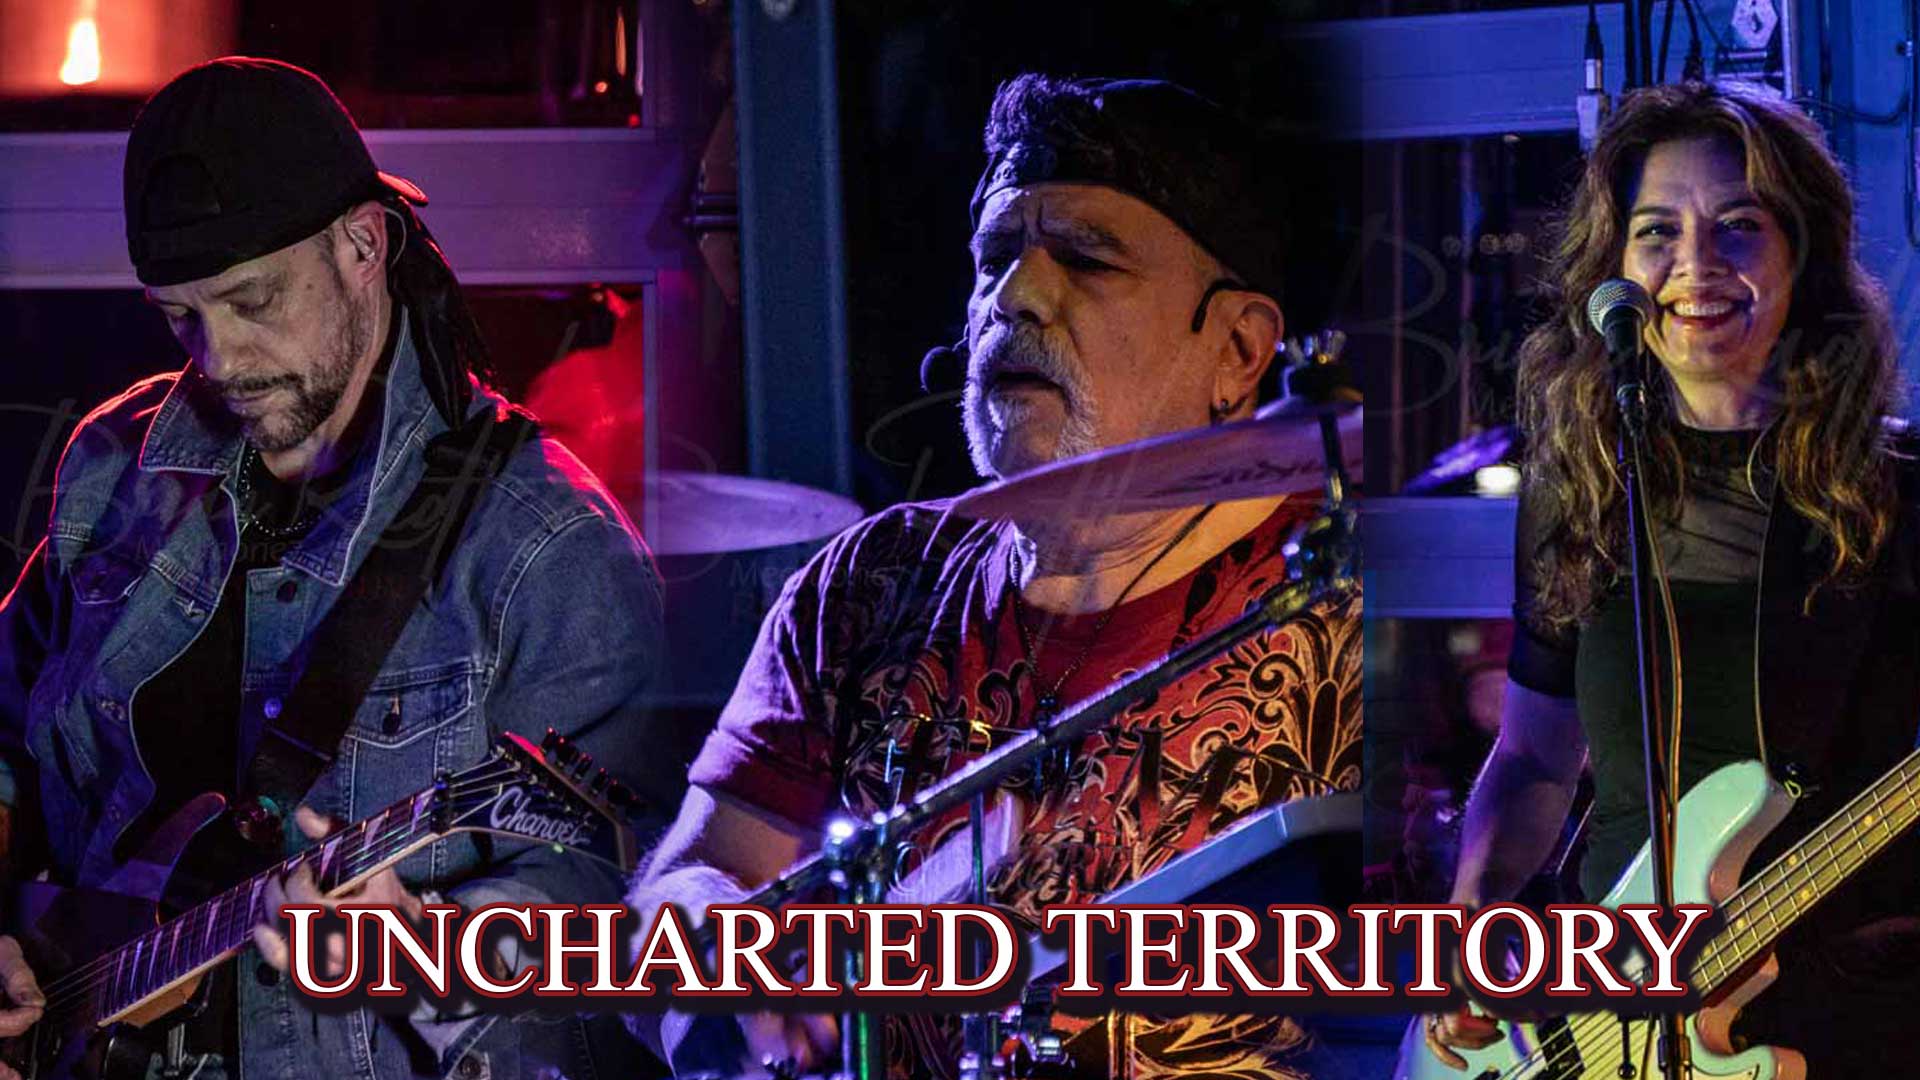 Uncharted Territory Band at Waverly